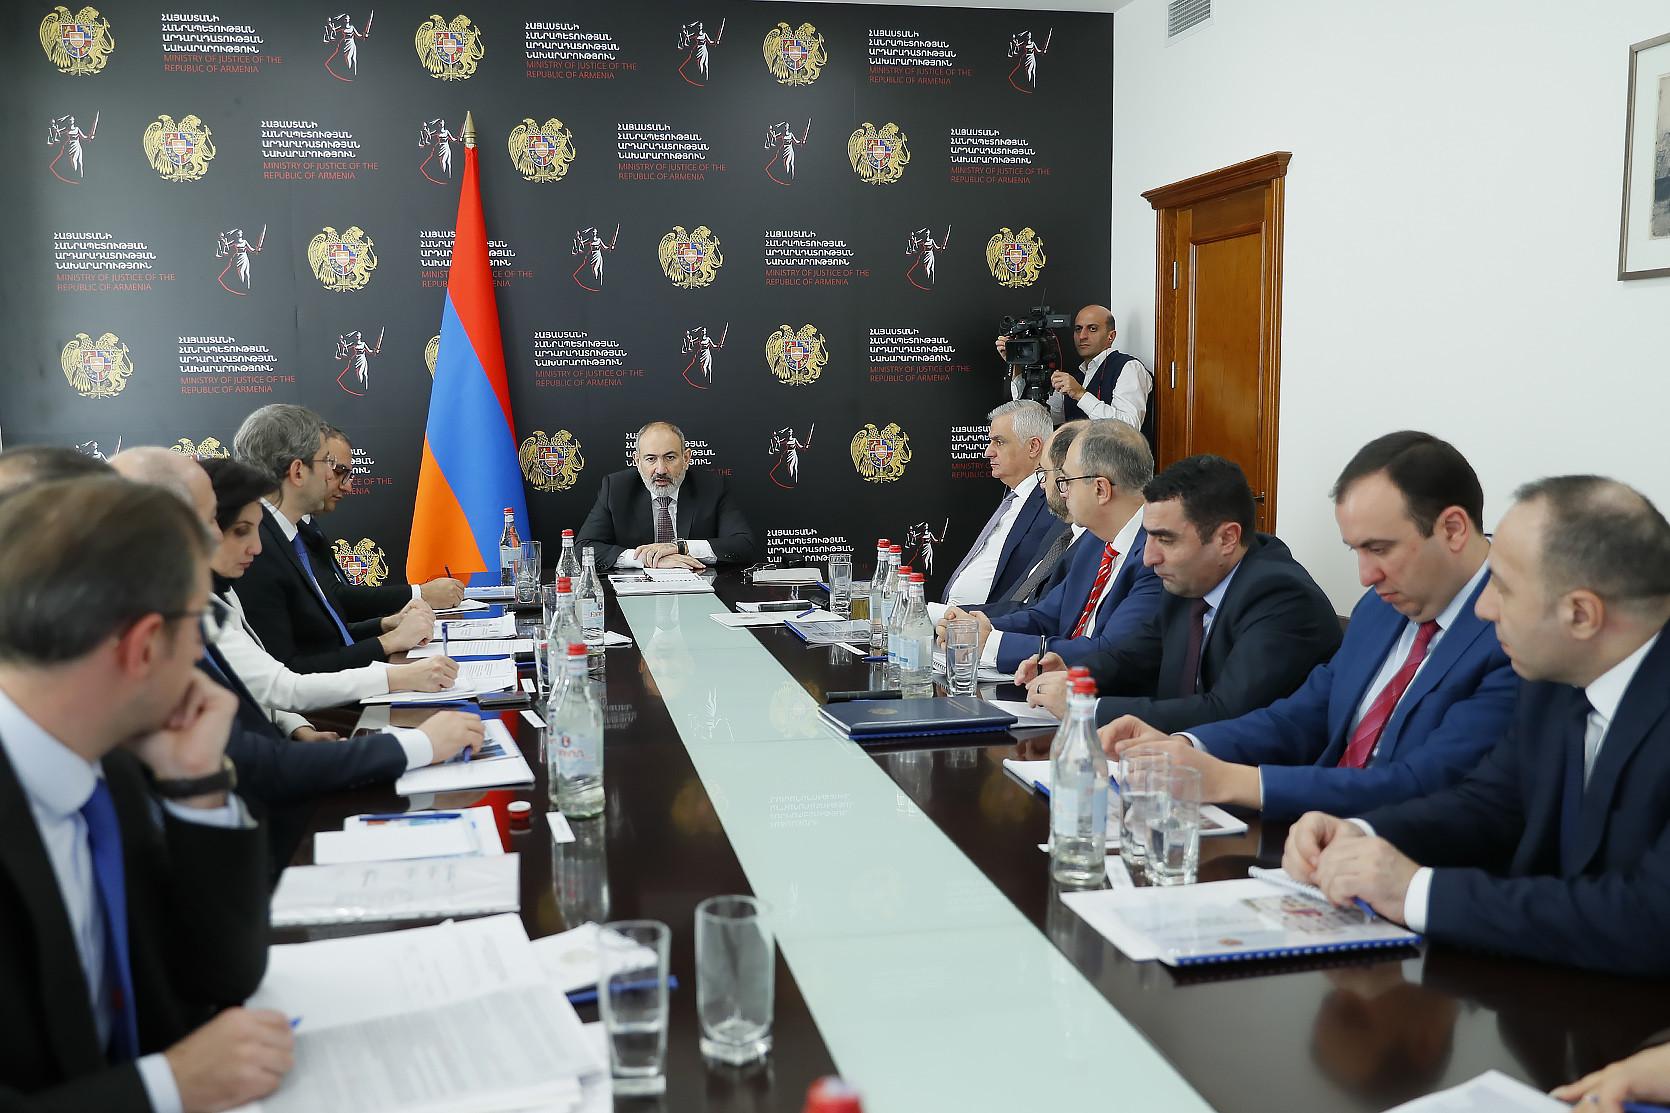 Pashinyan Says Armenia Needs New Constitution; Fails to Provide Specifics